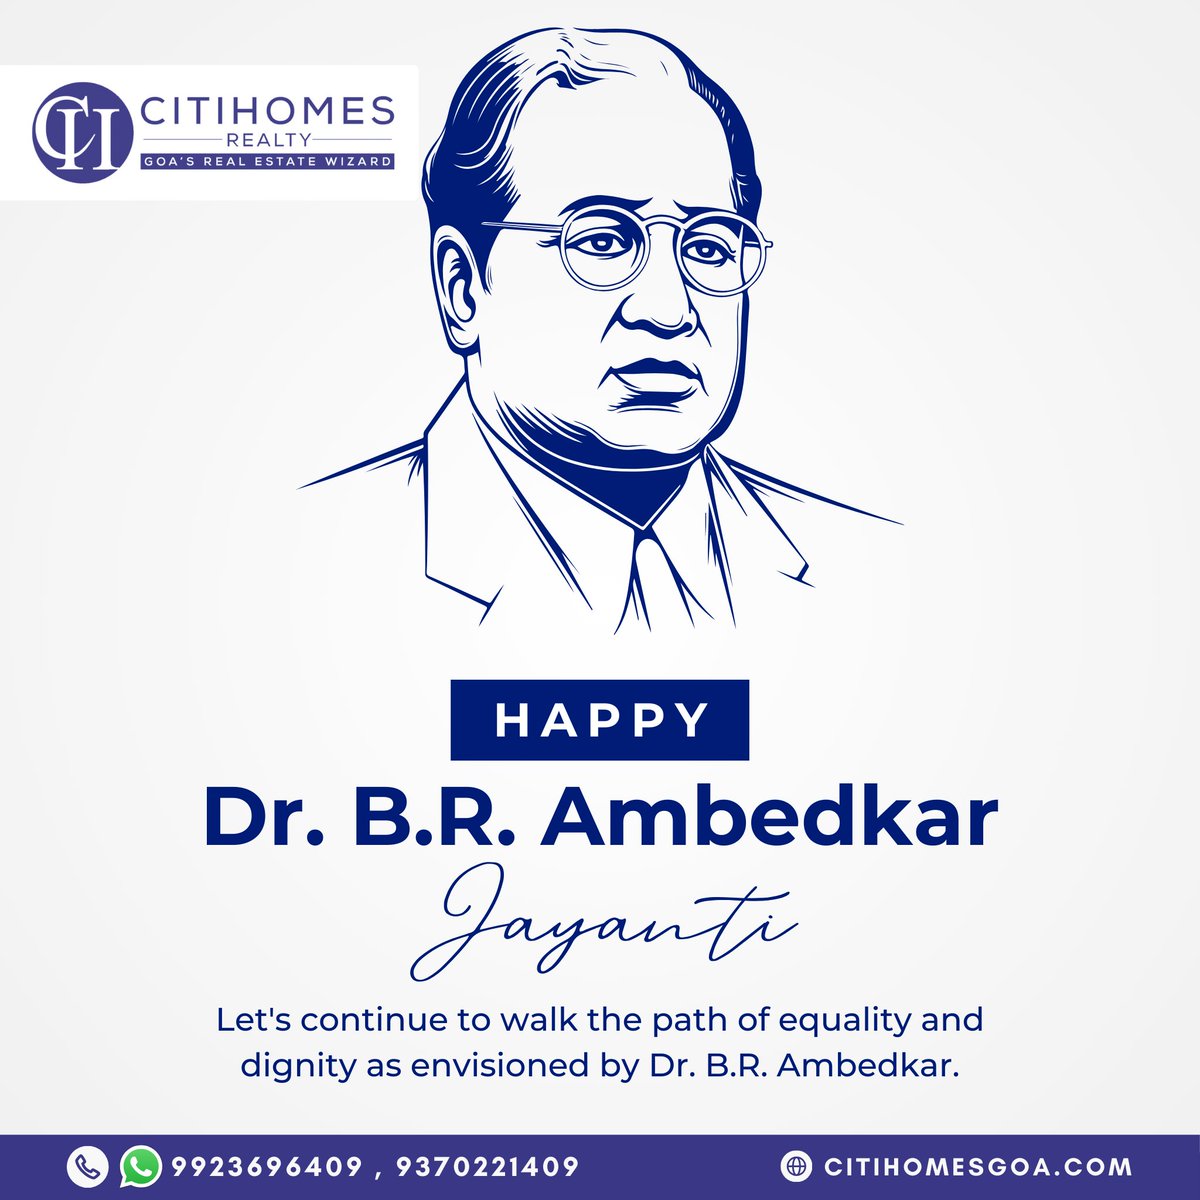 Let's continue to walk the path of equality and dignity as envisioned by 𝗗𝗿. 𝗕.𝗥. 𝗔𝗺𝗯𝗲𝗱𝗸𝗮𝗿.  

#CITIHOMES #KumarSiddharth #BRAmbedkarJayanti #AmbedkarJayanti #Goa